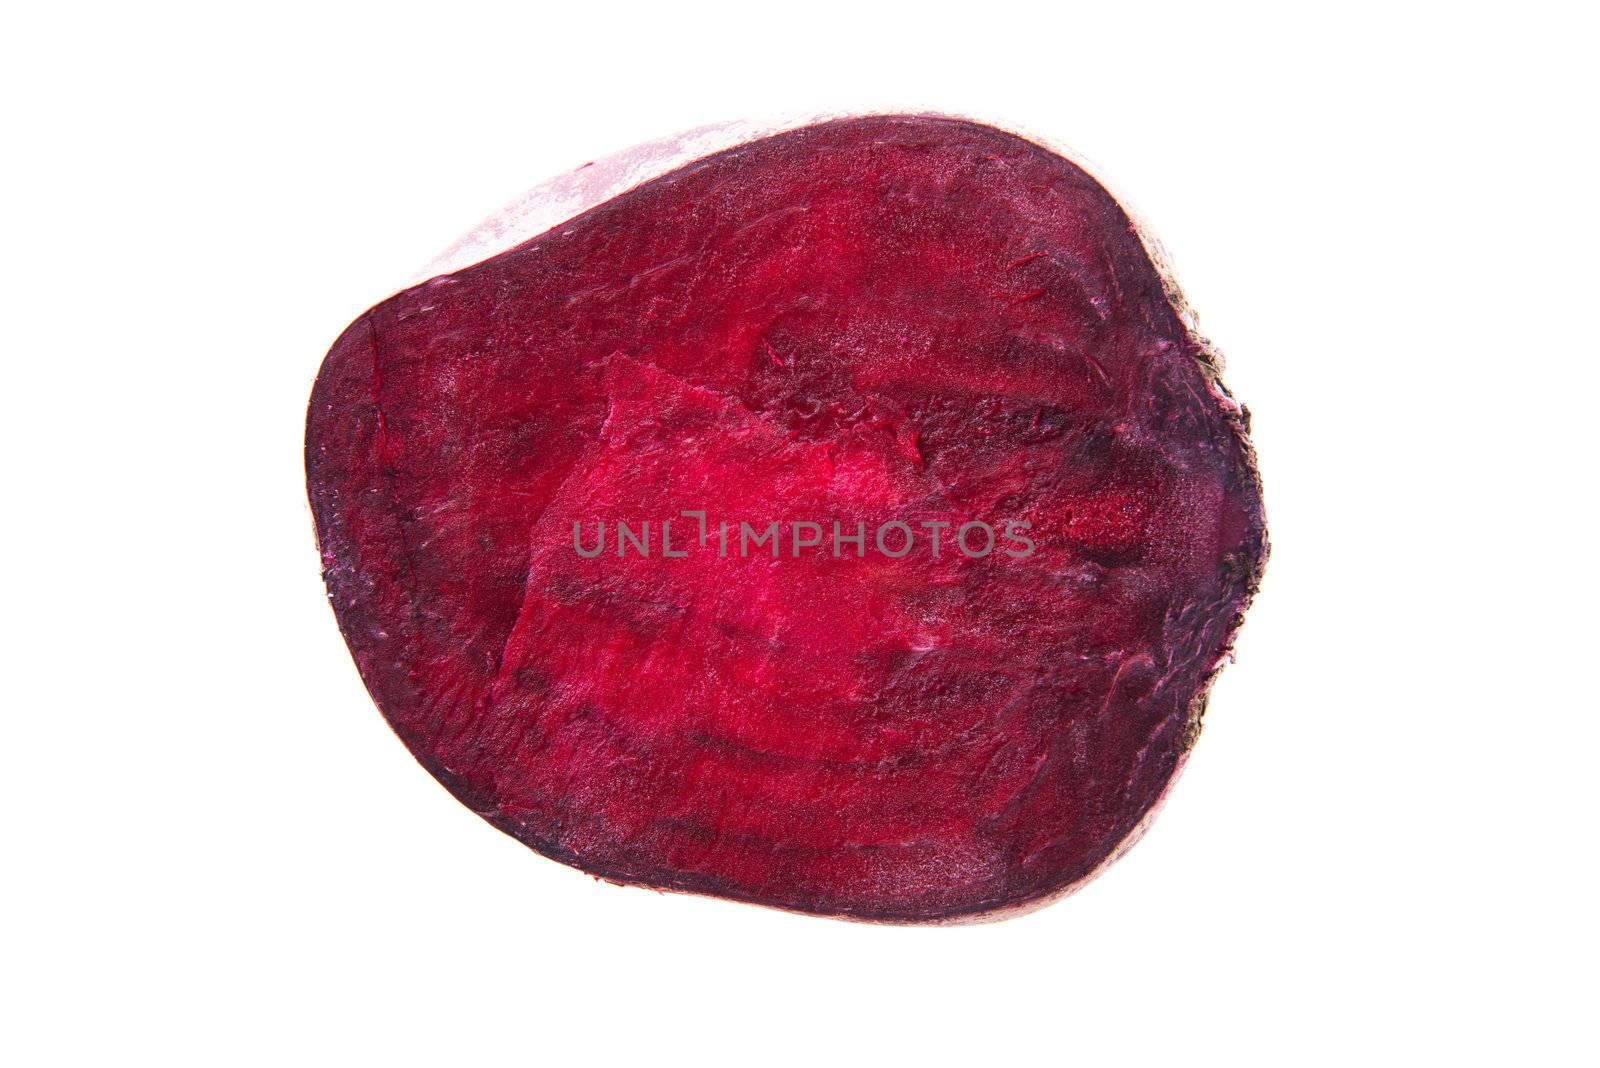 Red beets isolated on white